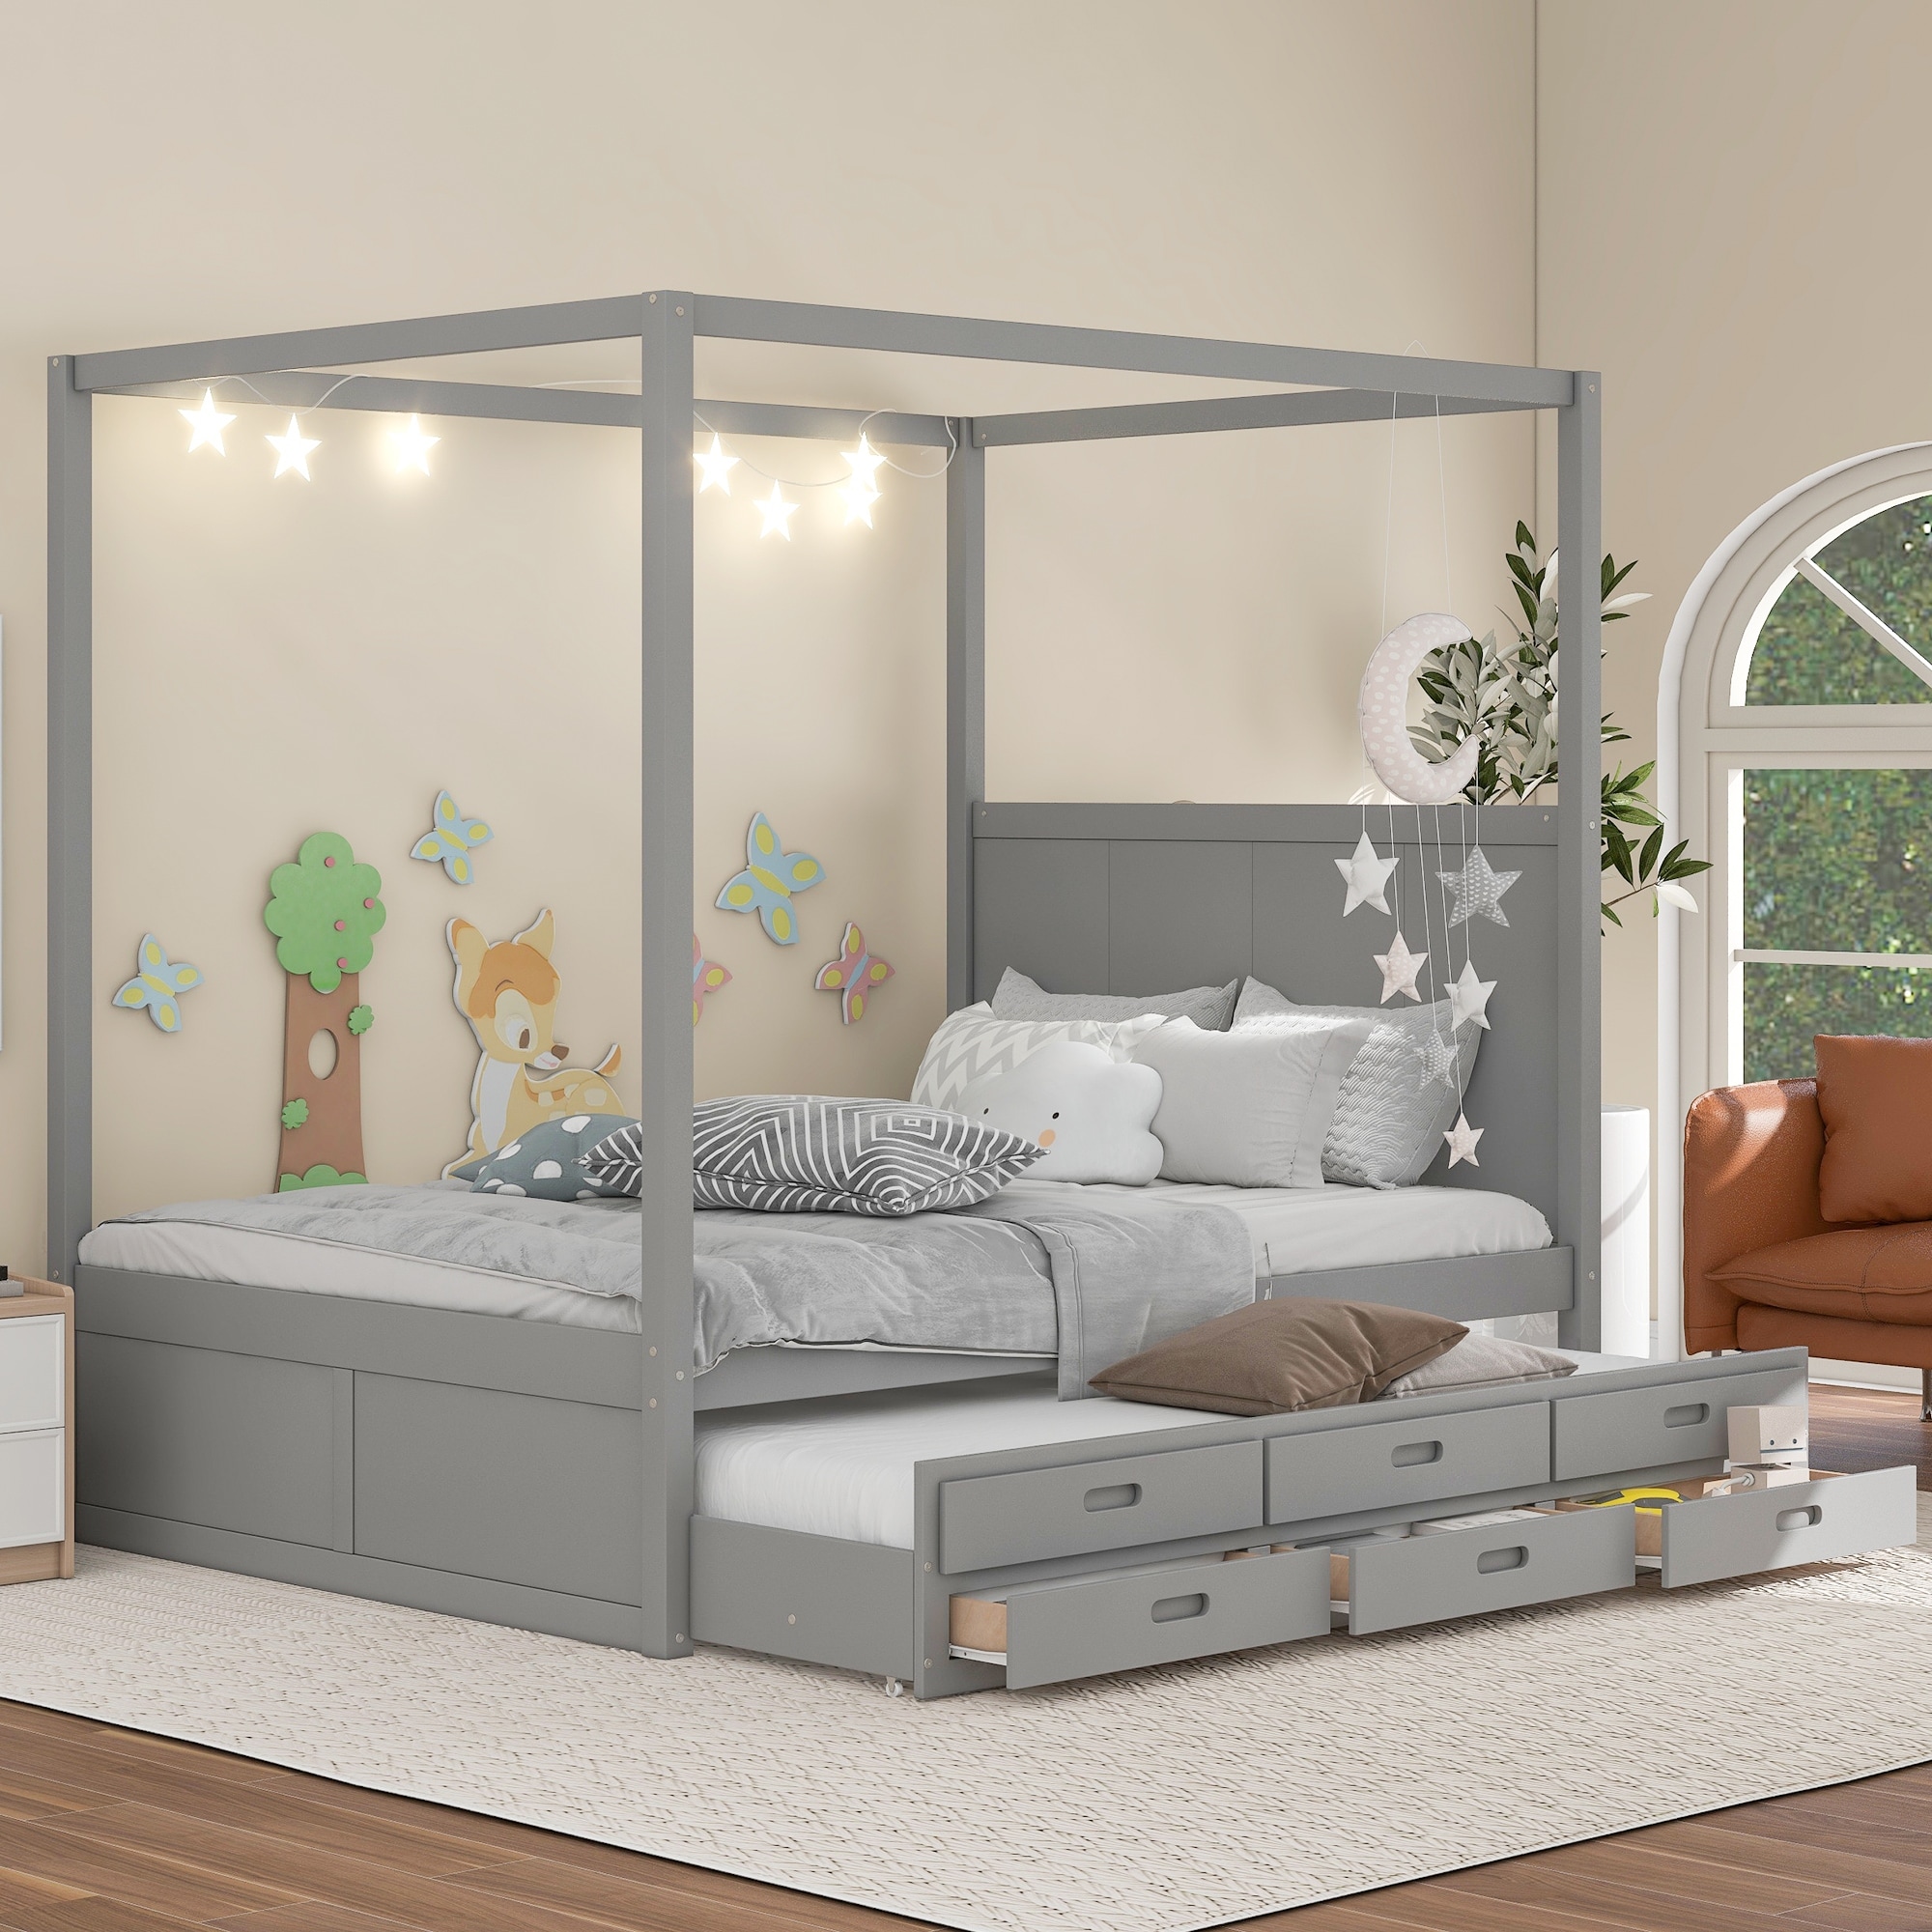 Canopy Bed Kids Beds - Bed Bath & Beyond